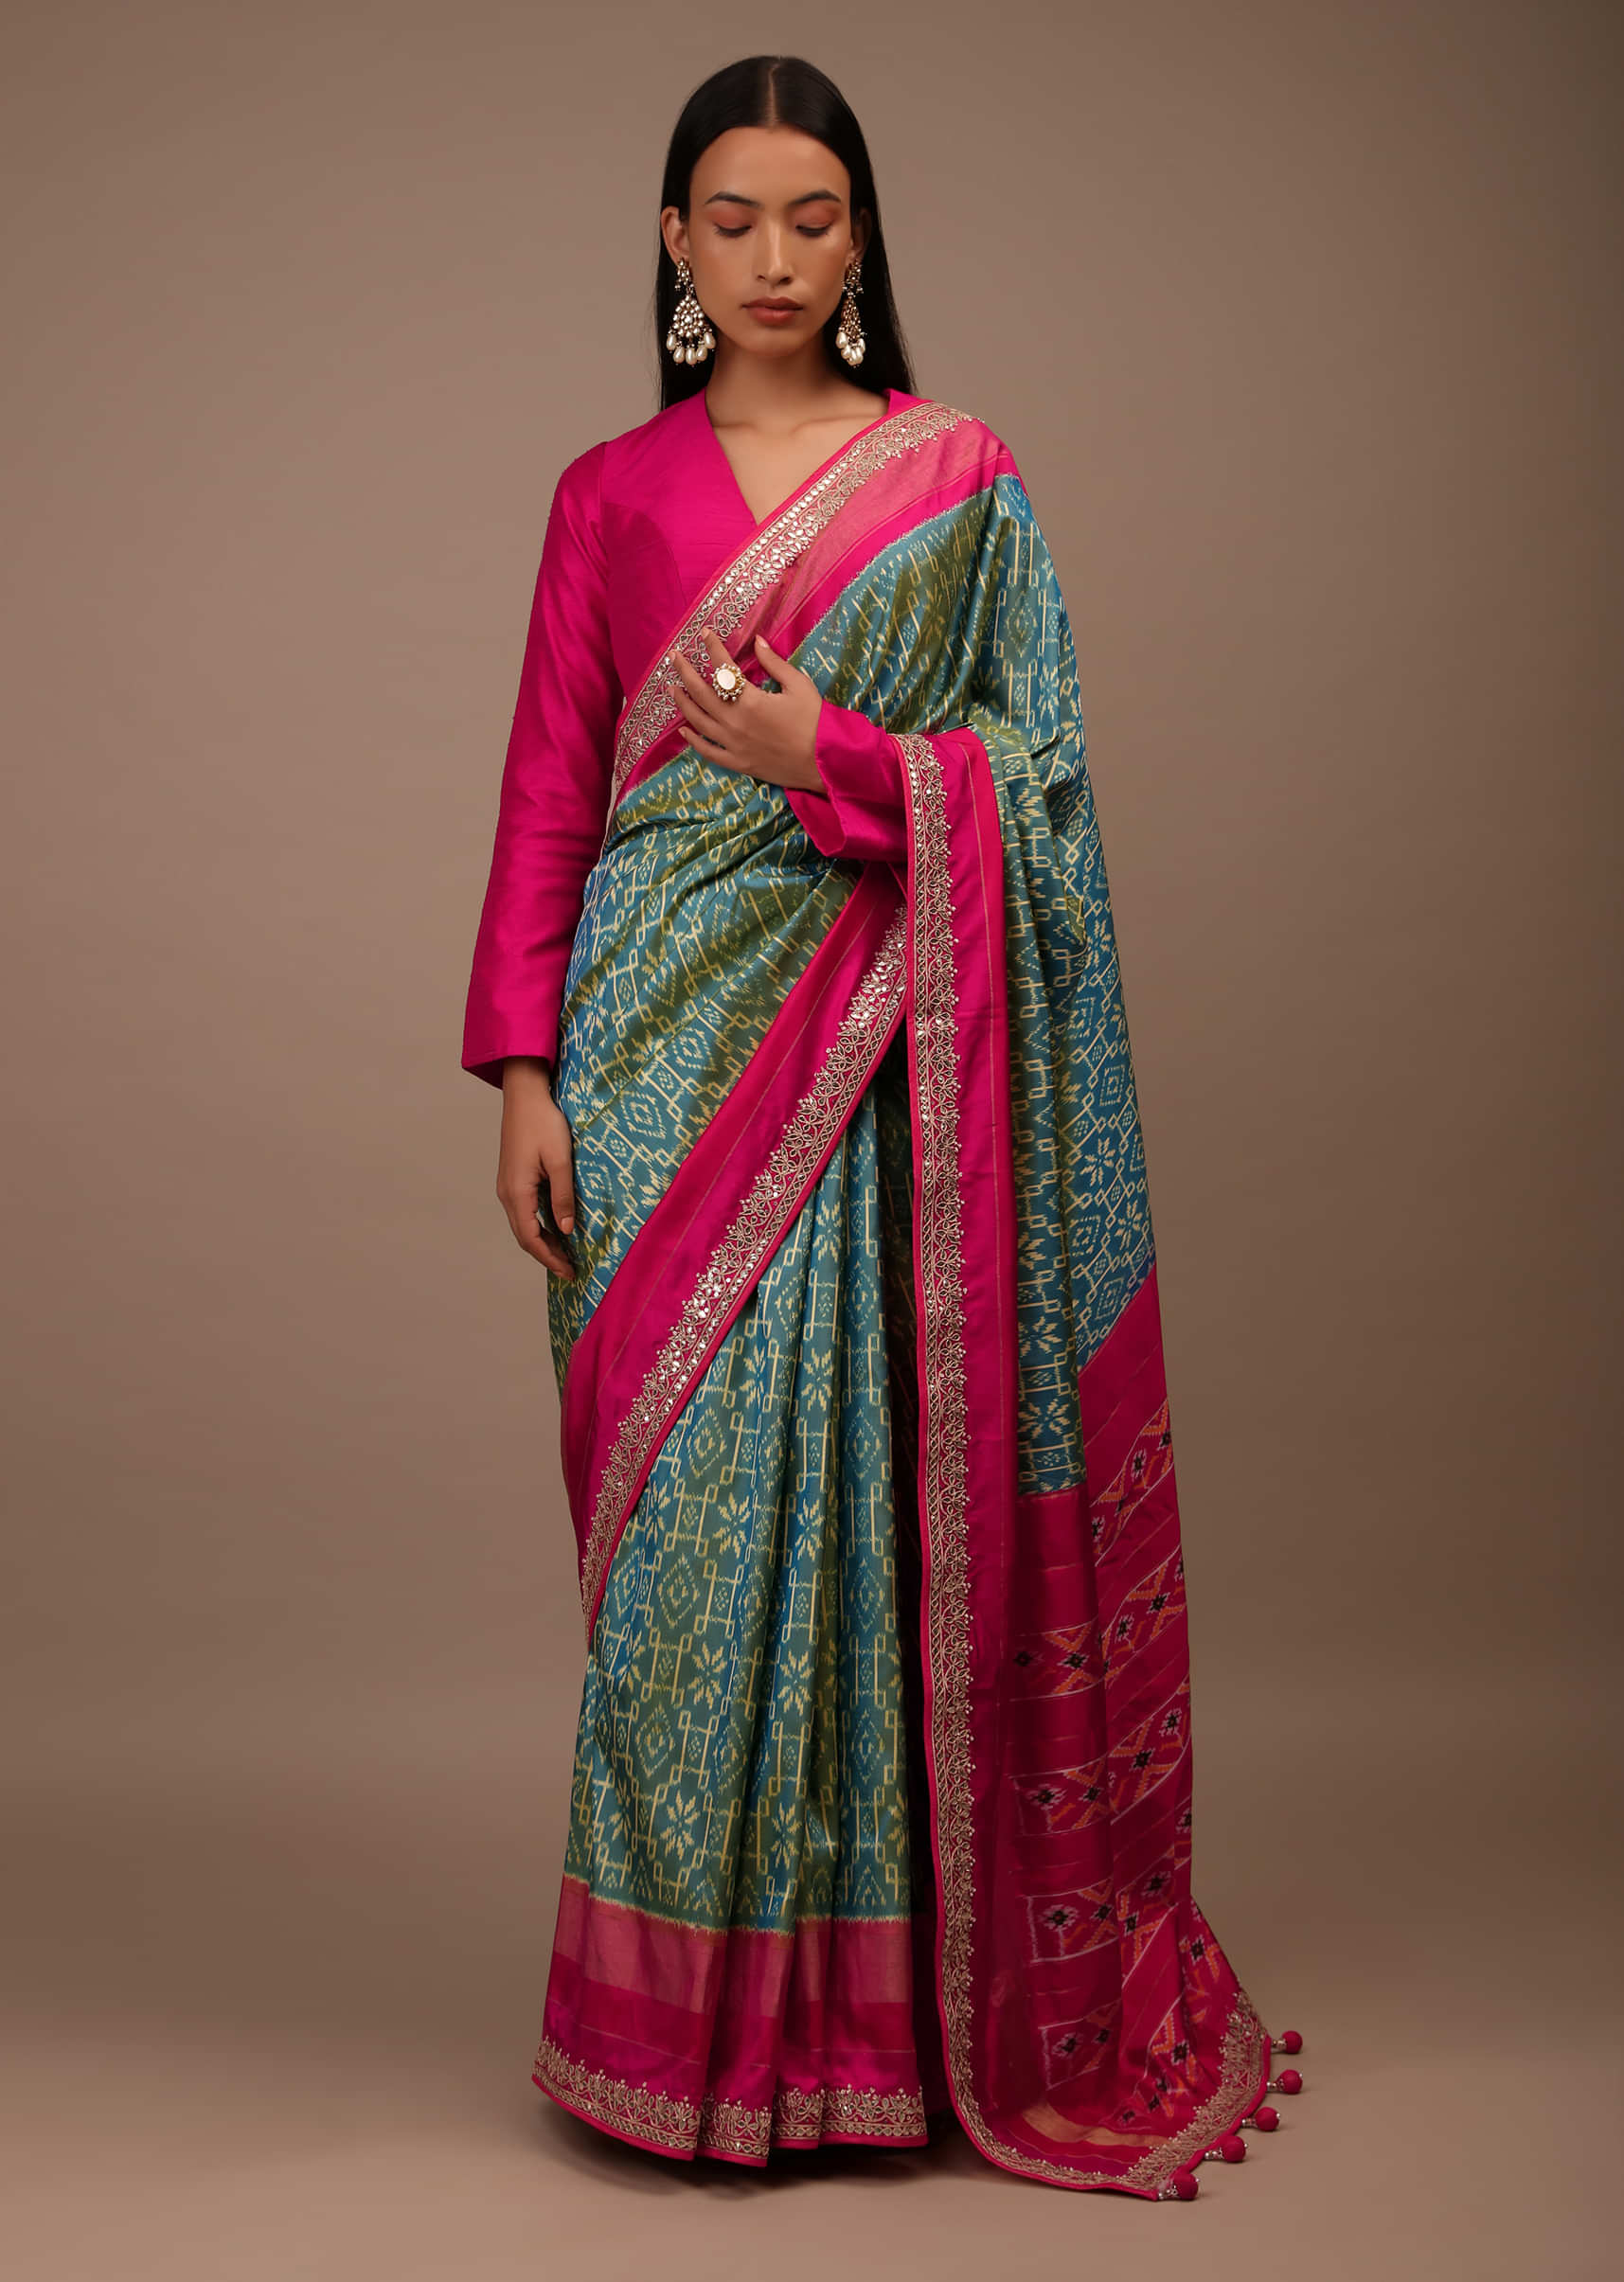 Blue And Green Two Toned Saree In Silk With Pure Patola Weave And Gotta Patti Embroidered Border